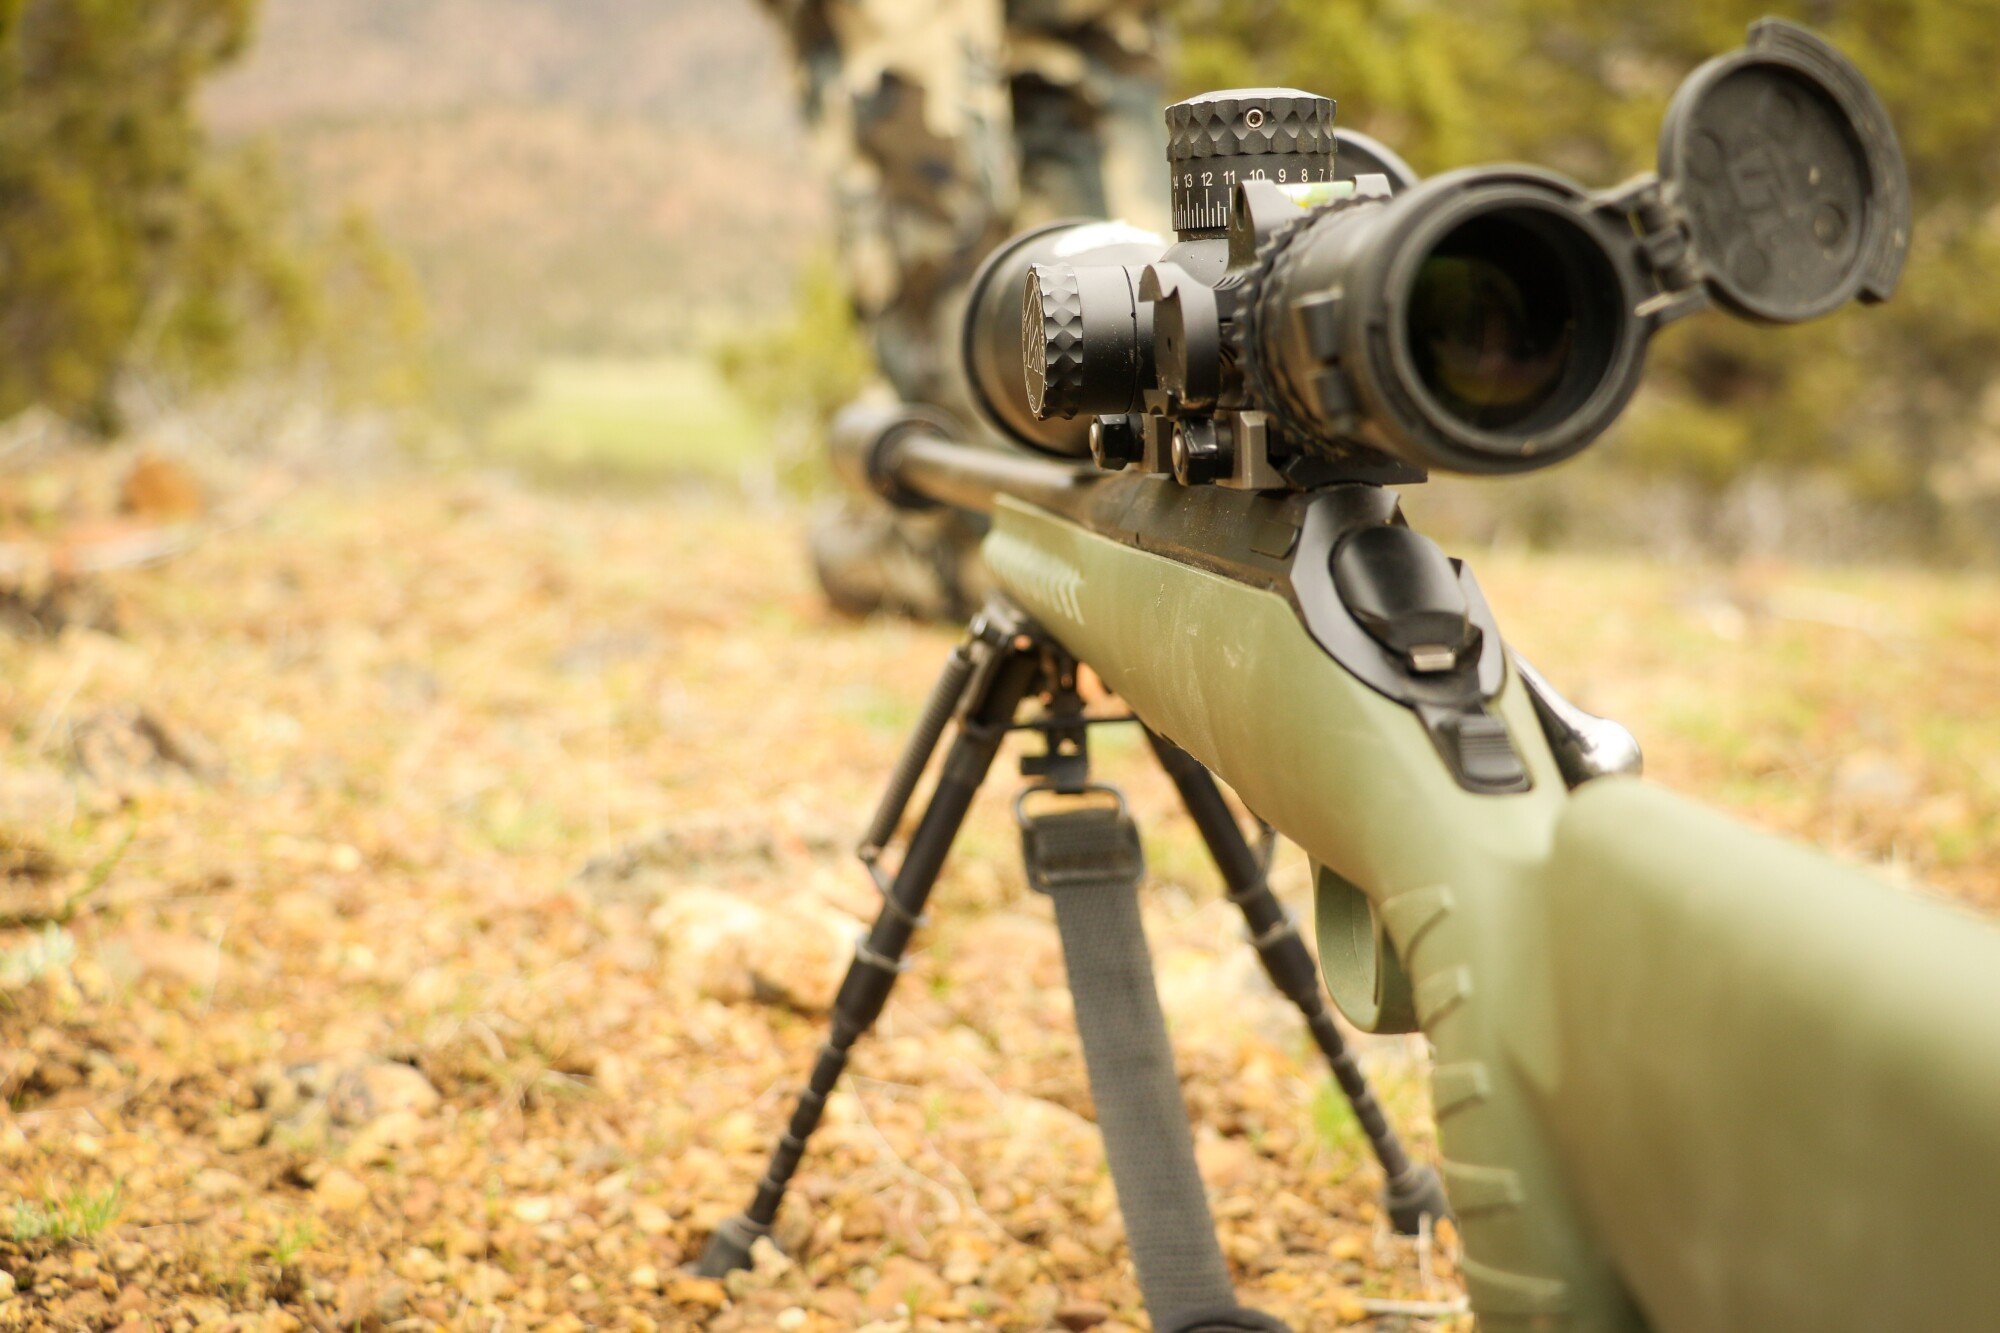 The Ultimate Guide to Choosing the Best Night Vision Scope for Your Hunting Rifle